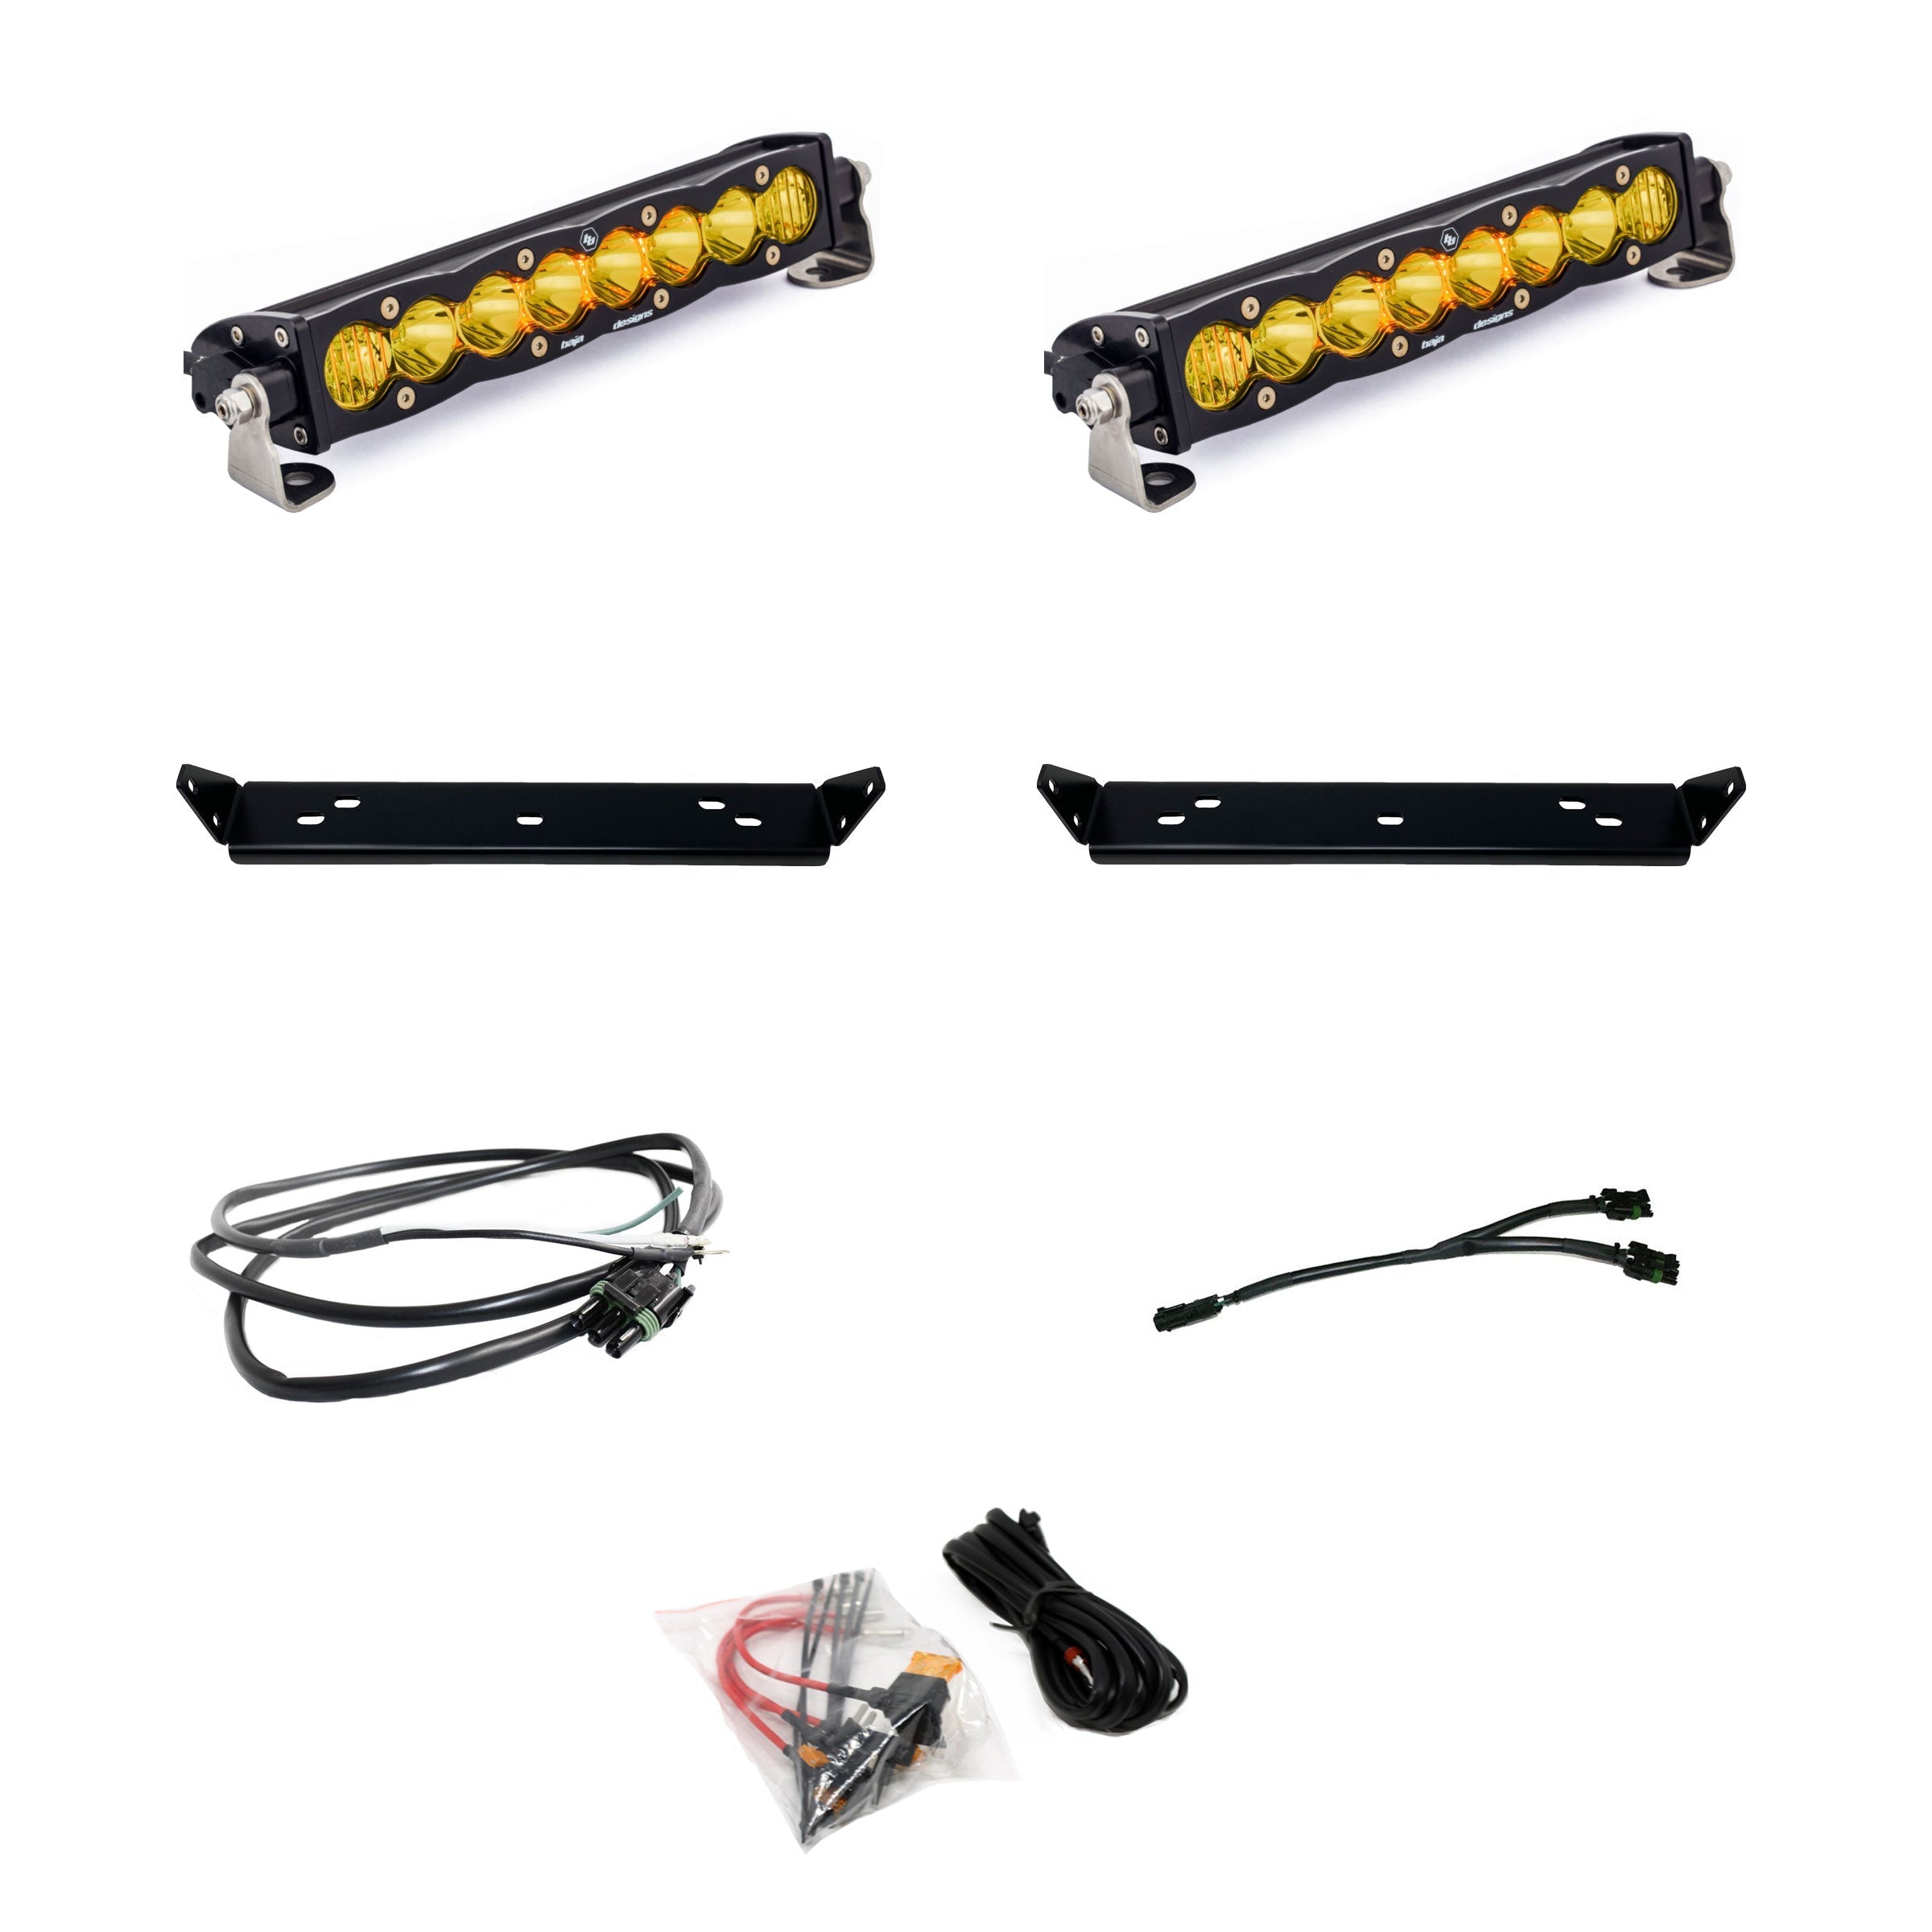 SPV Parts Customizable - Baja Designs S8 10 Inch Dual Behind Grille Light Bar Kit fit 21-On Ford Raptor